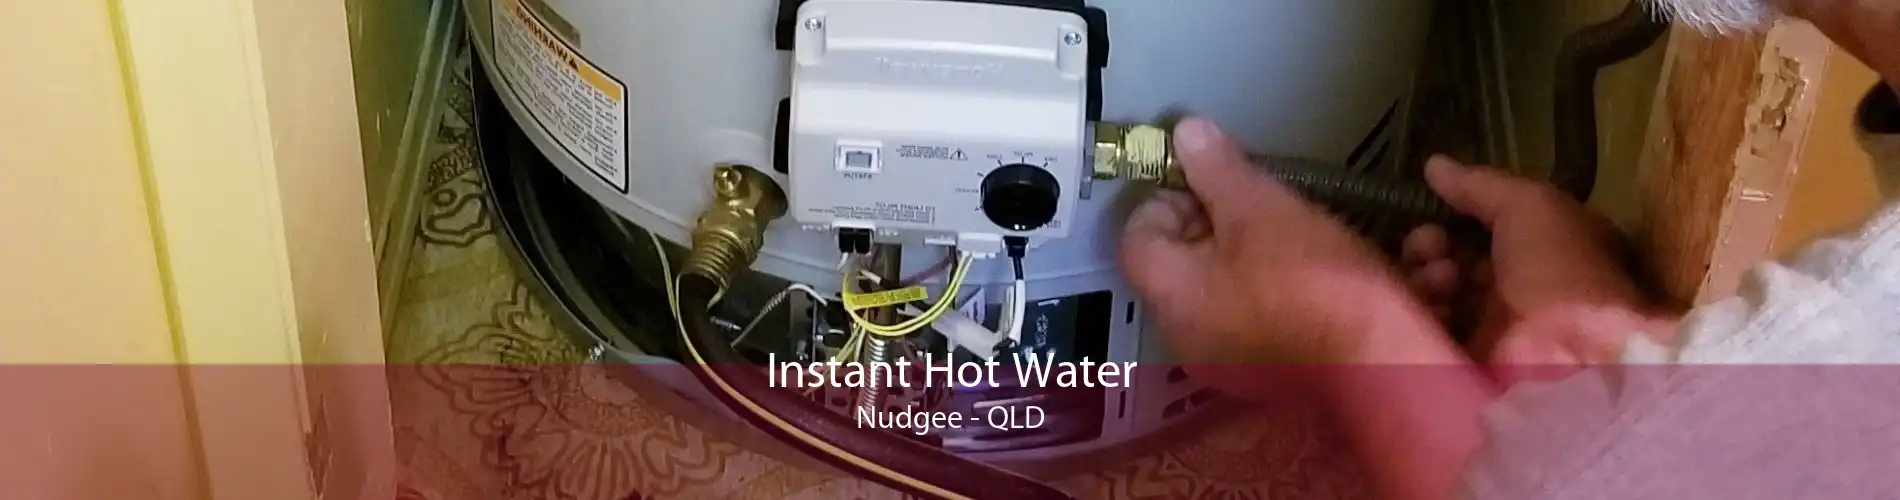 Instant Hot Water Nudgee - QLD